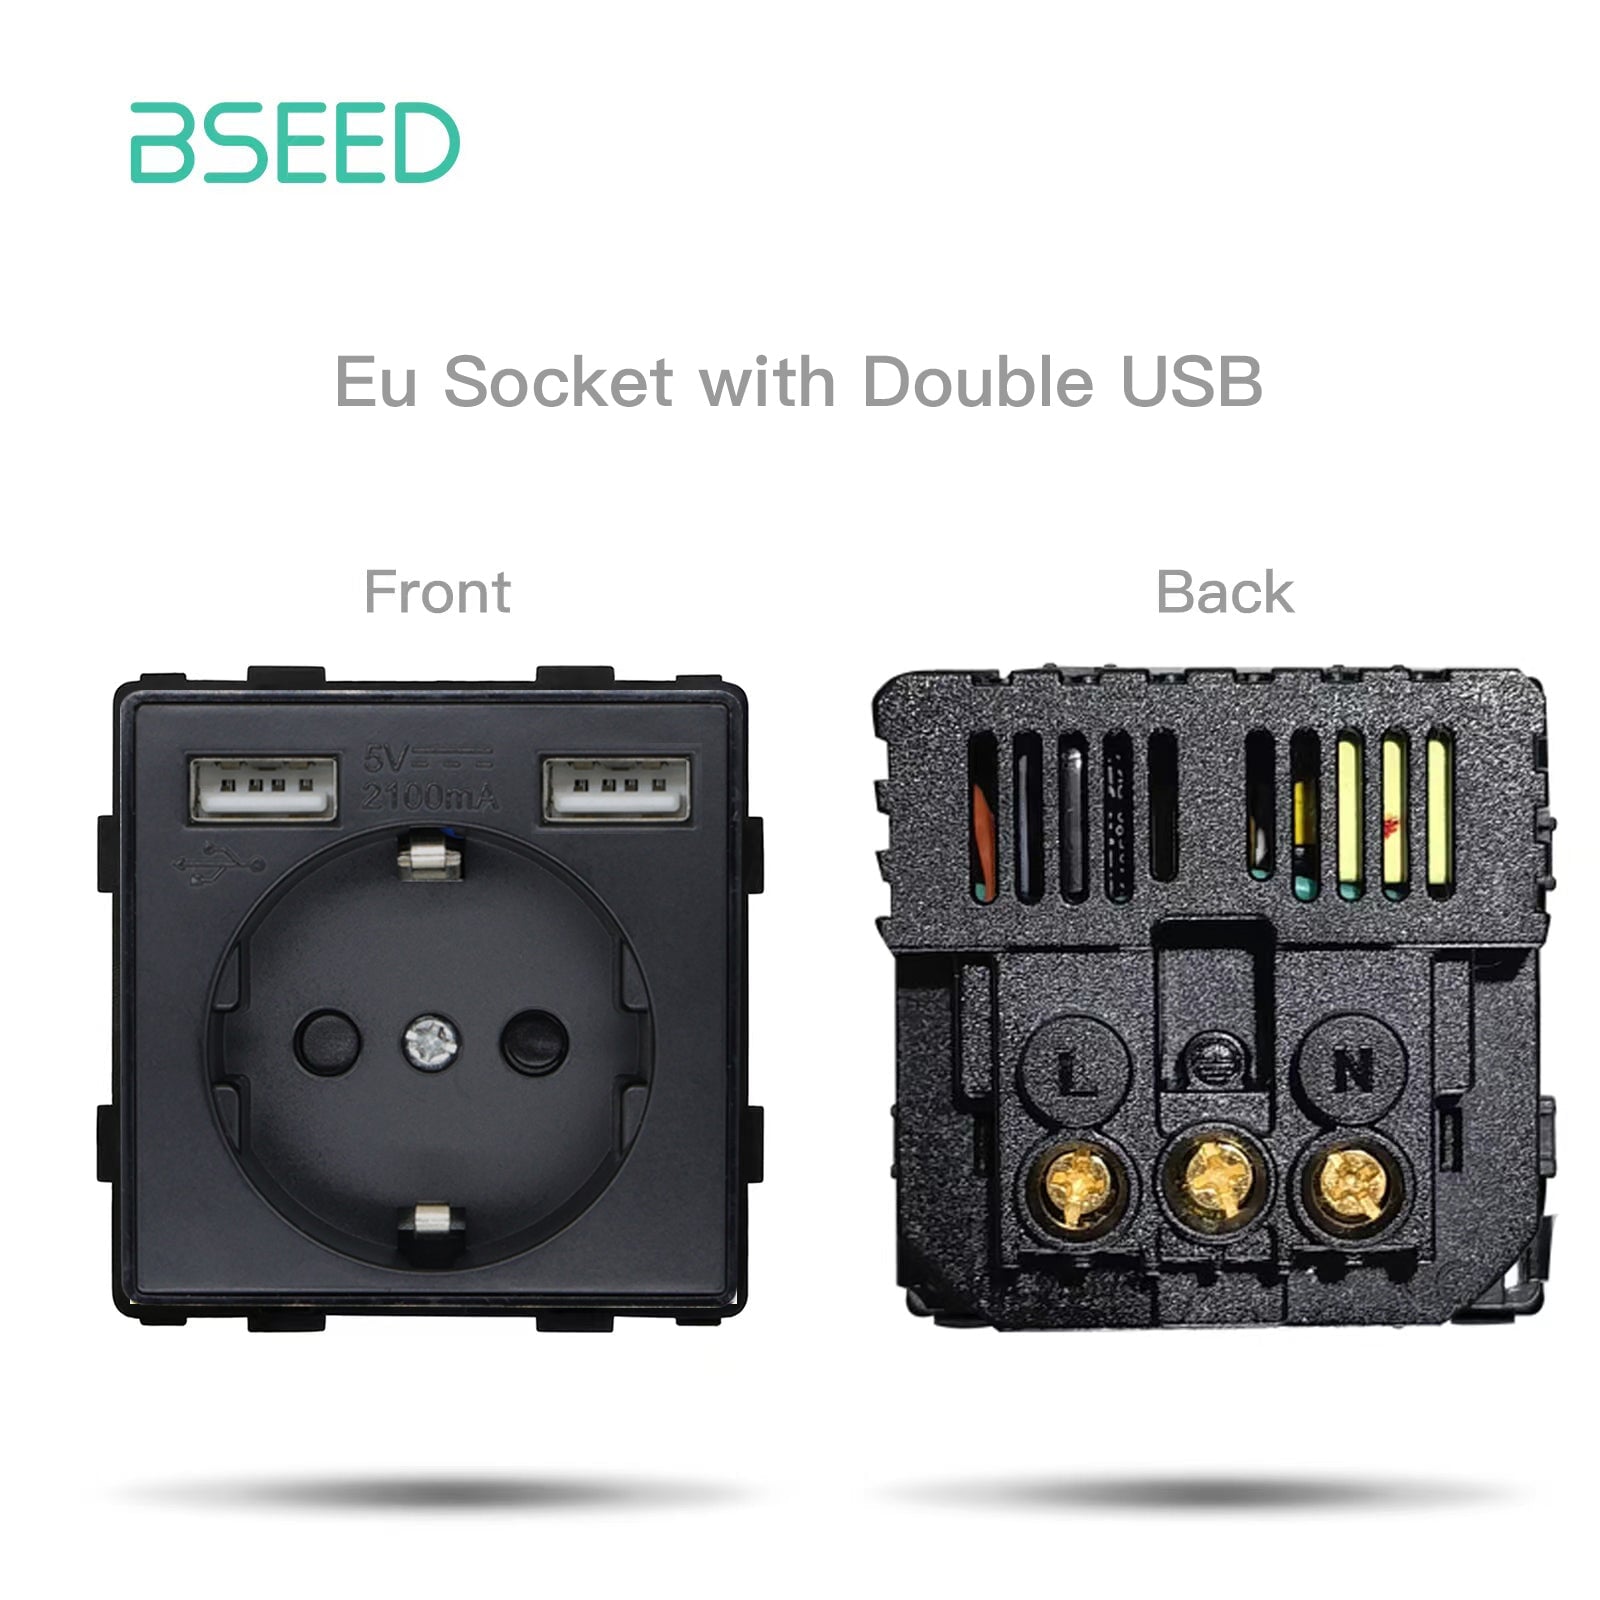 BSEED EU standard Function Key Cover Socket With Double USB socket DIY Parts Power Outlets & Sockets Bseedswitch BLACK 